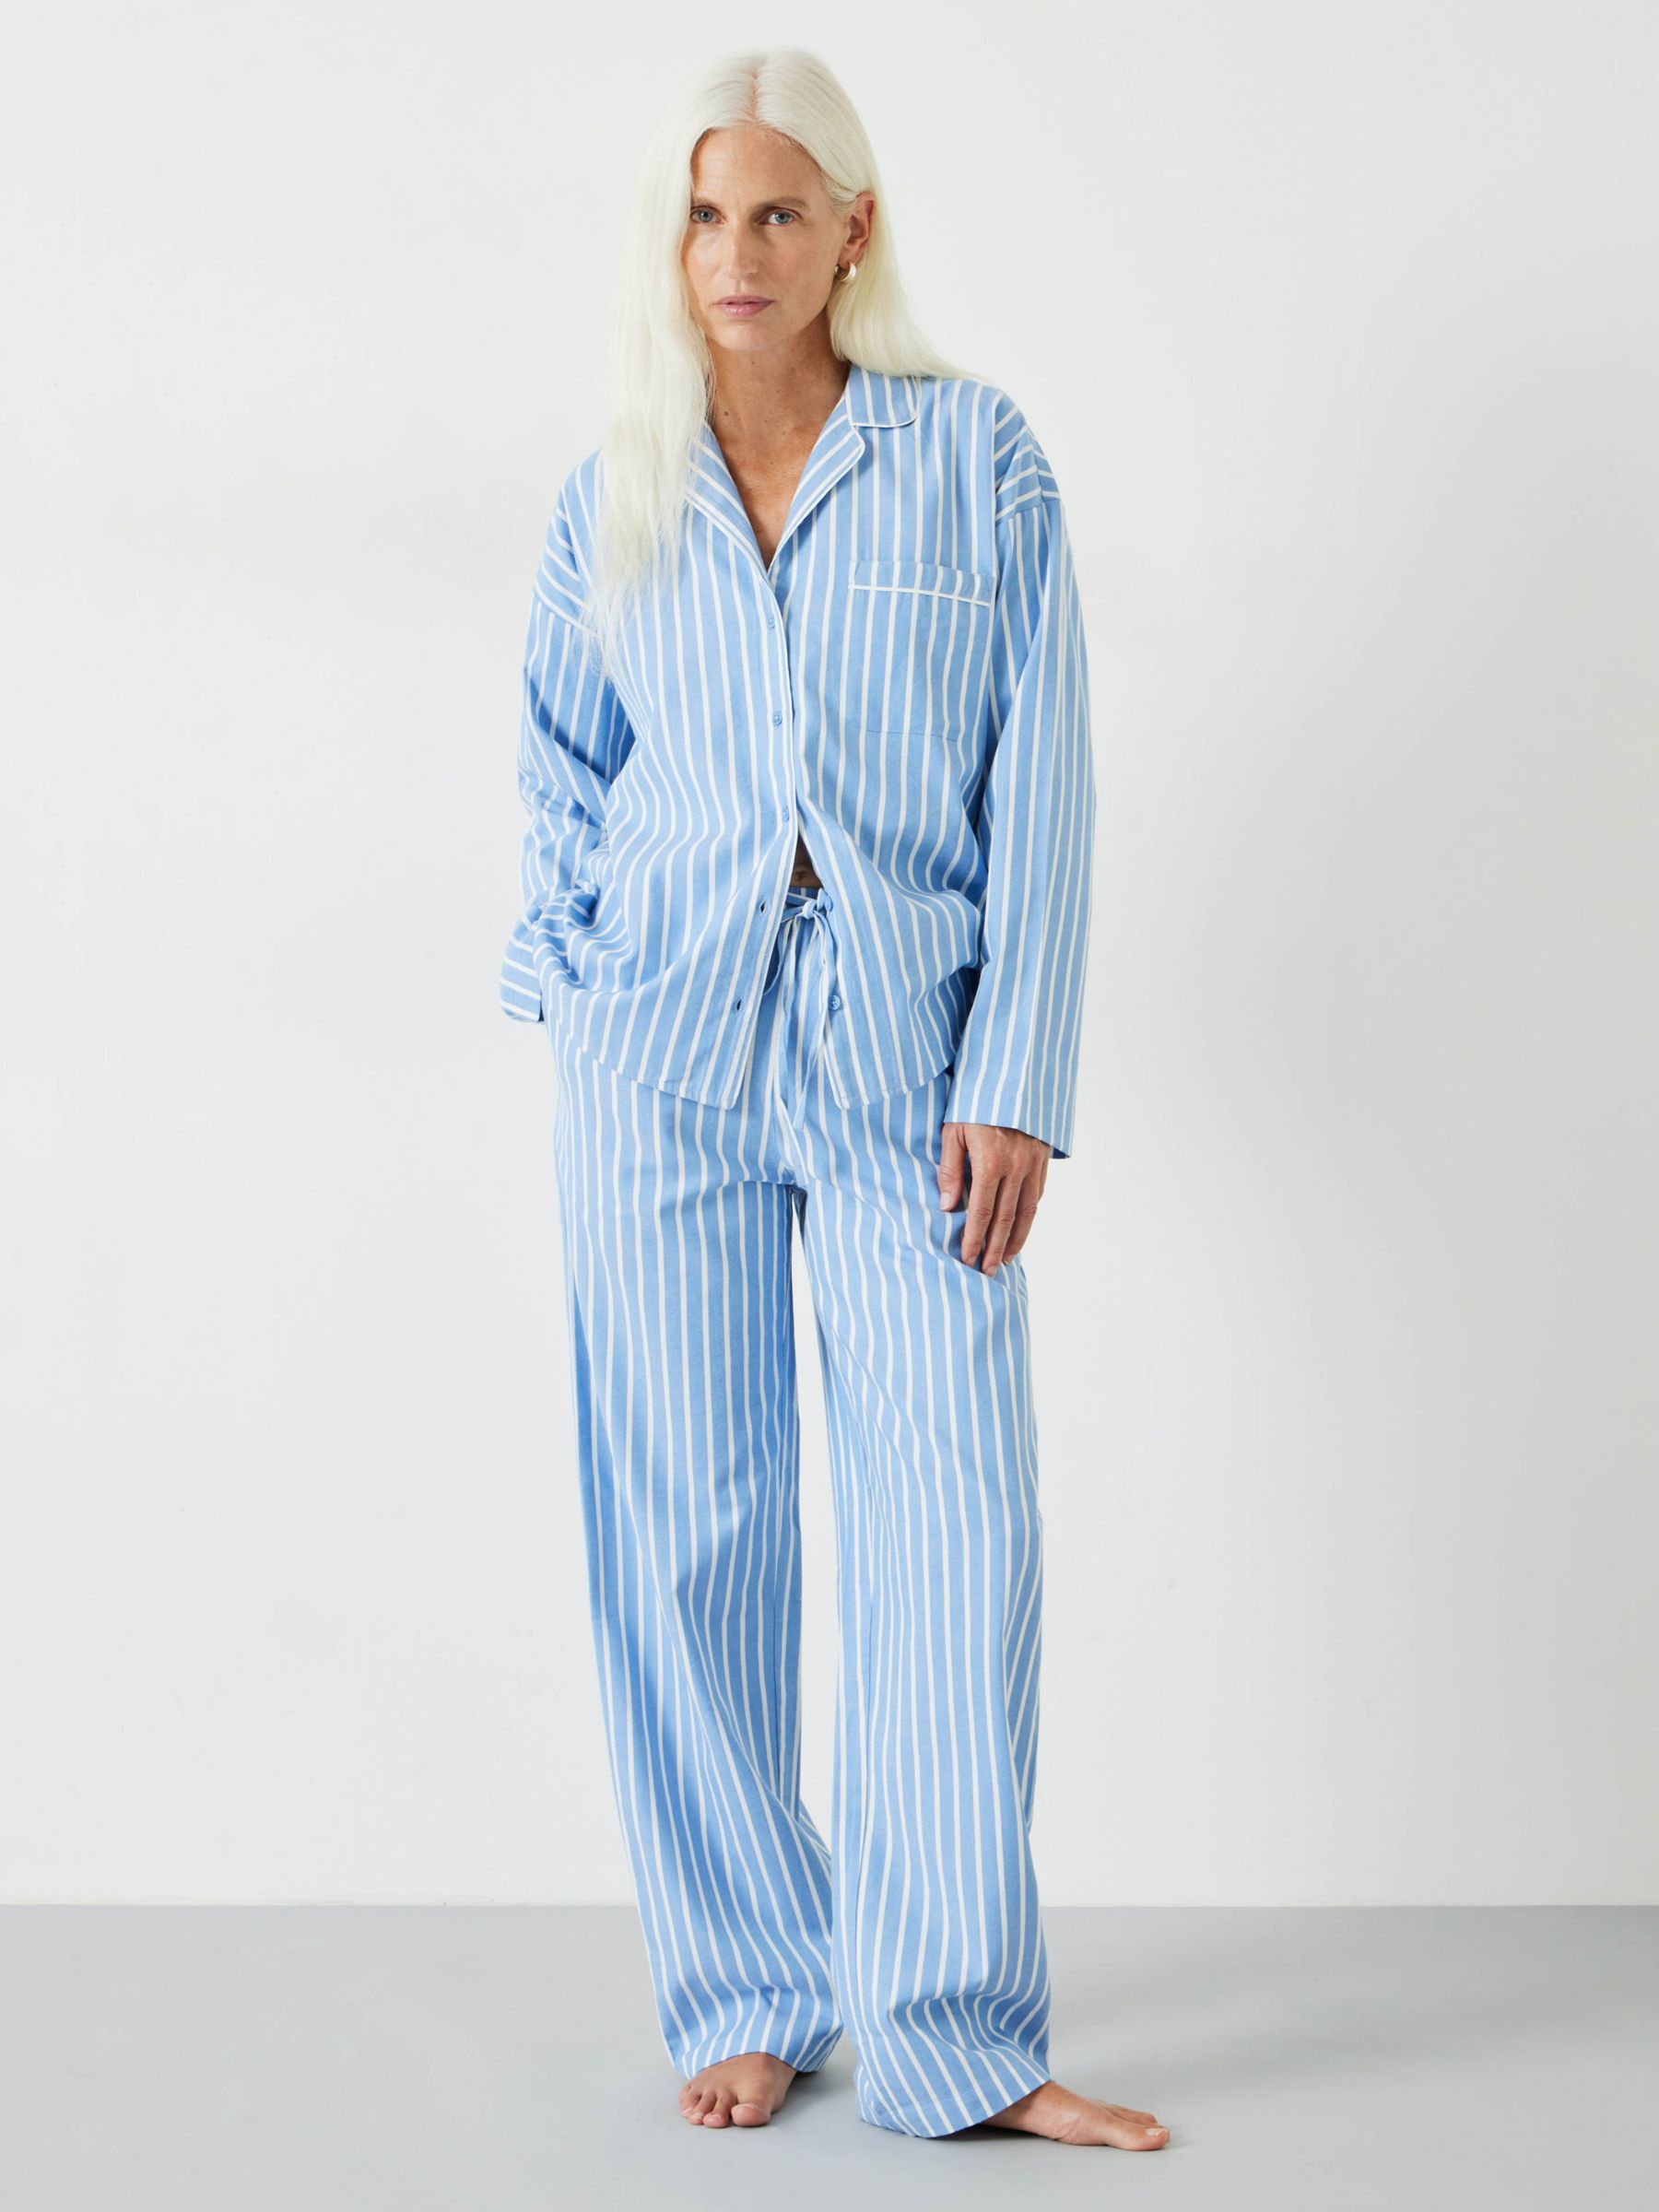 Introducing Our Brushed Organic Cotton Plaid PJ's 💕 Soft